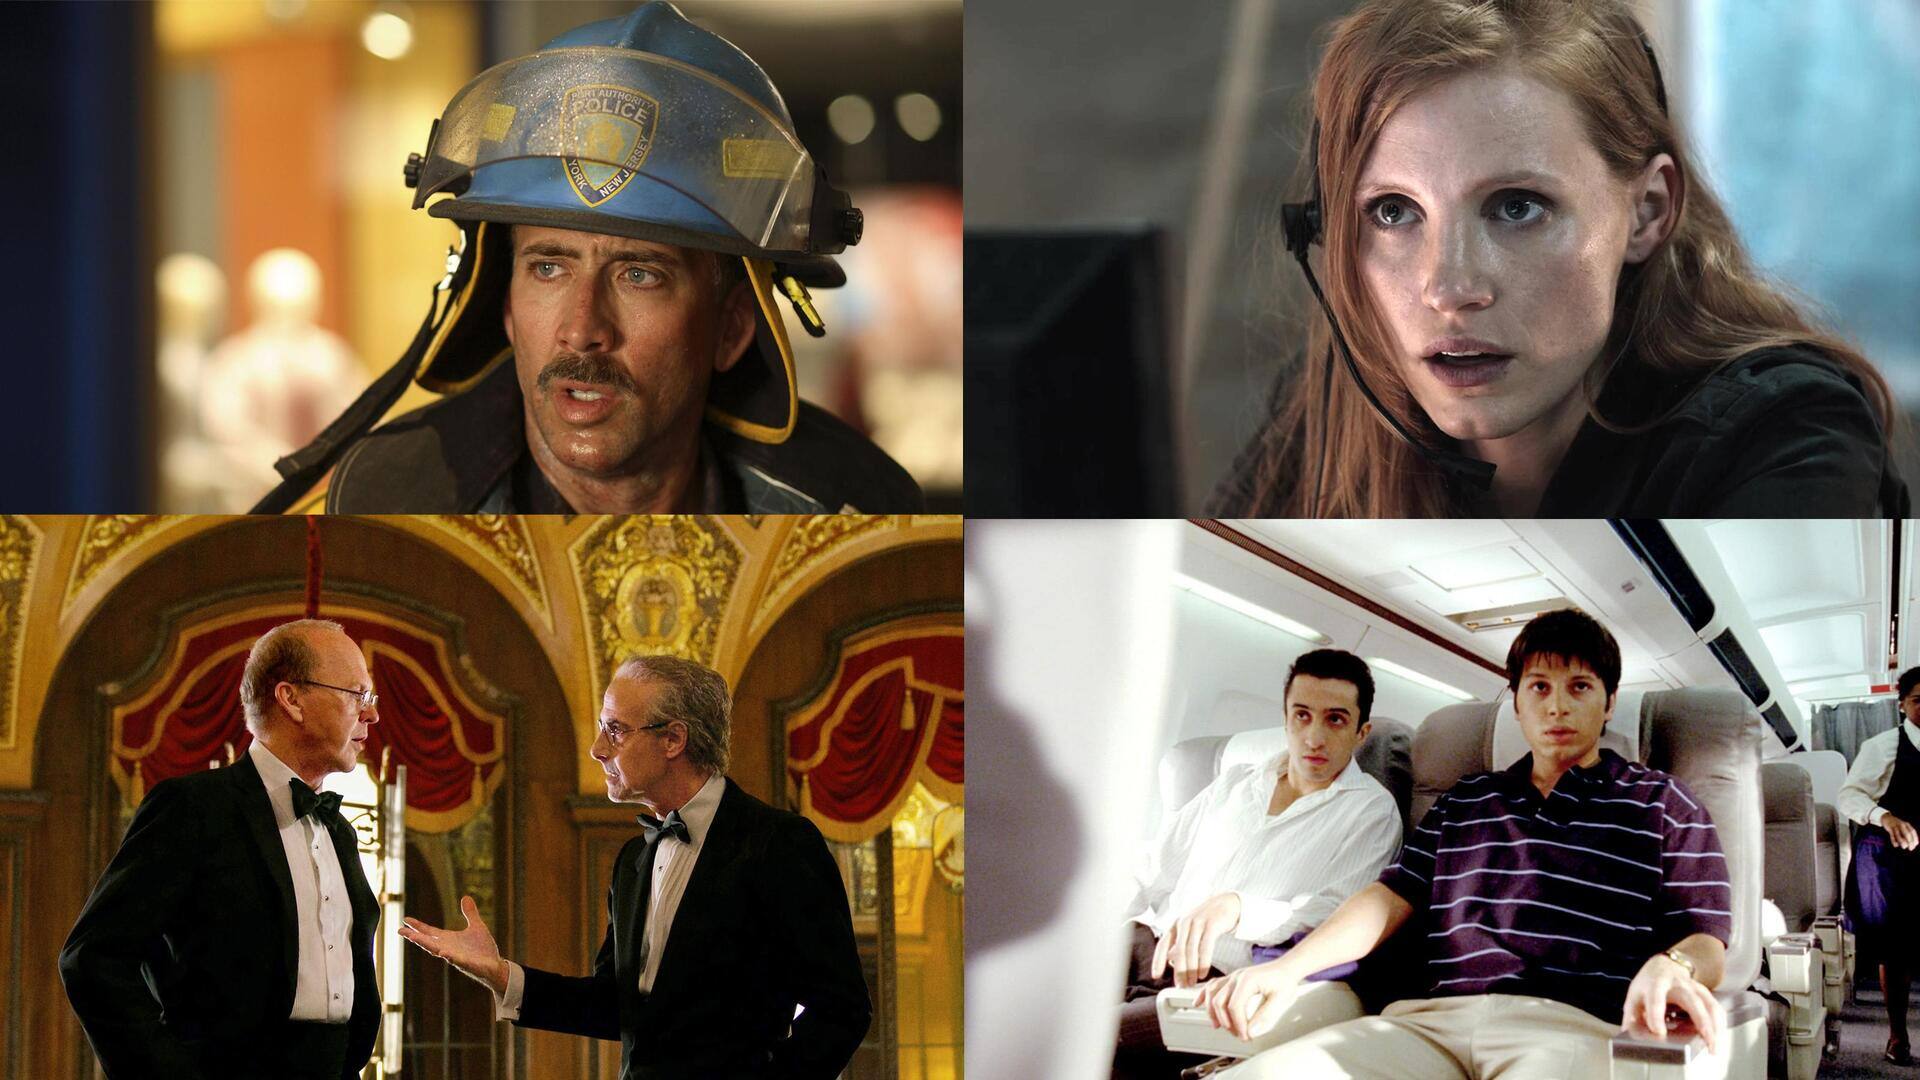 Must-watch Hollywood movies on the tragic 9/11 attacks